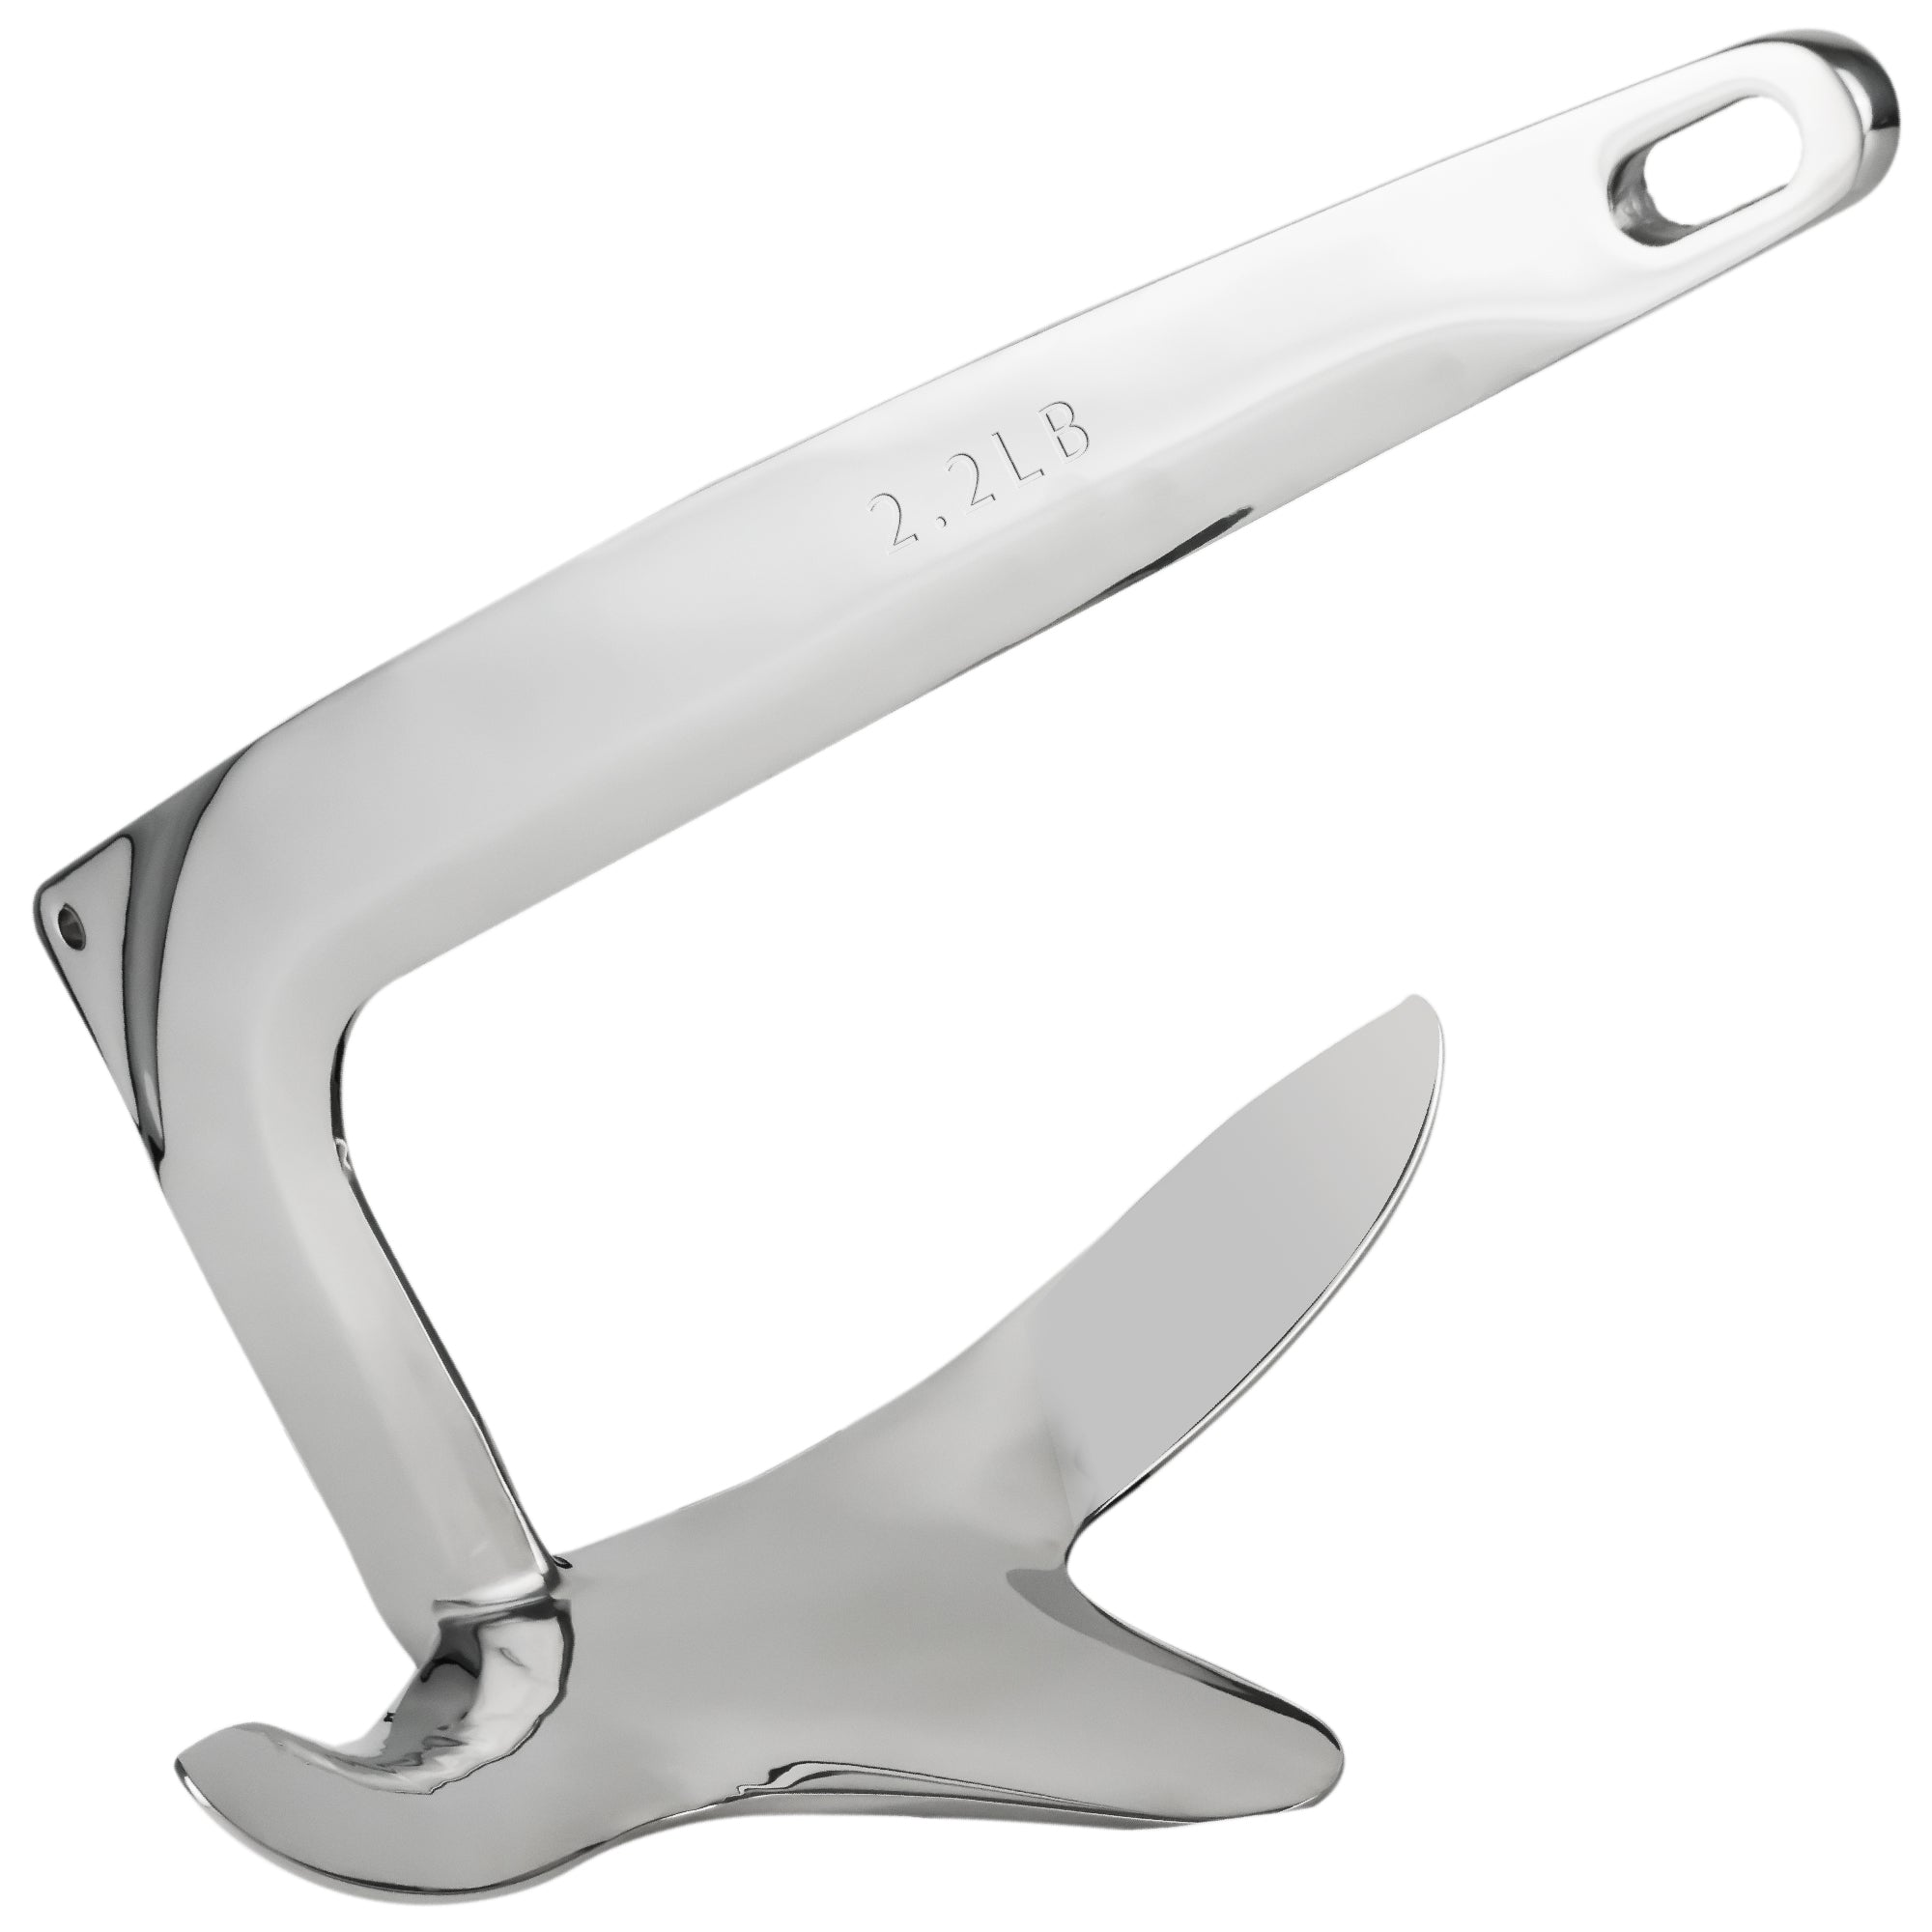 Bruce Style Claw Anchor, 2.2 Lb / 1 Kg Stainless Steel - FO4549